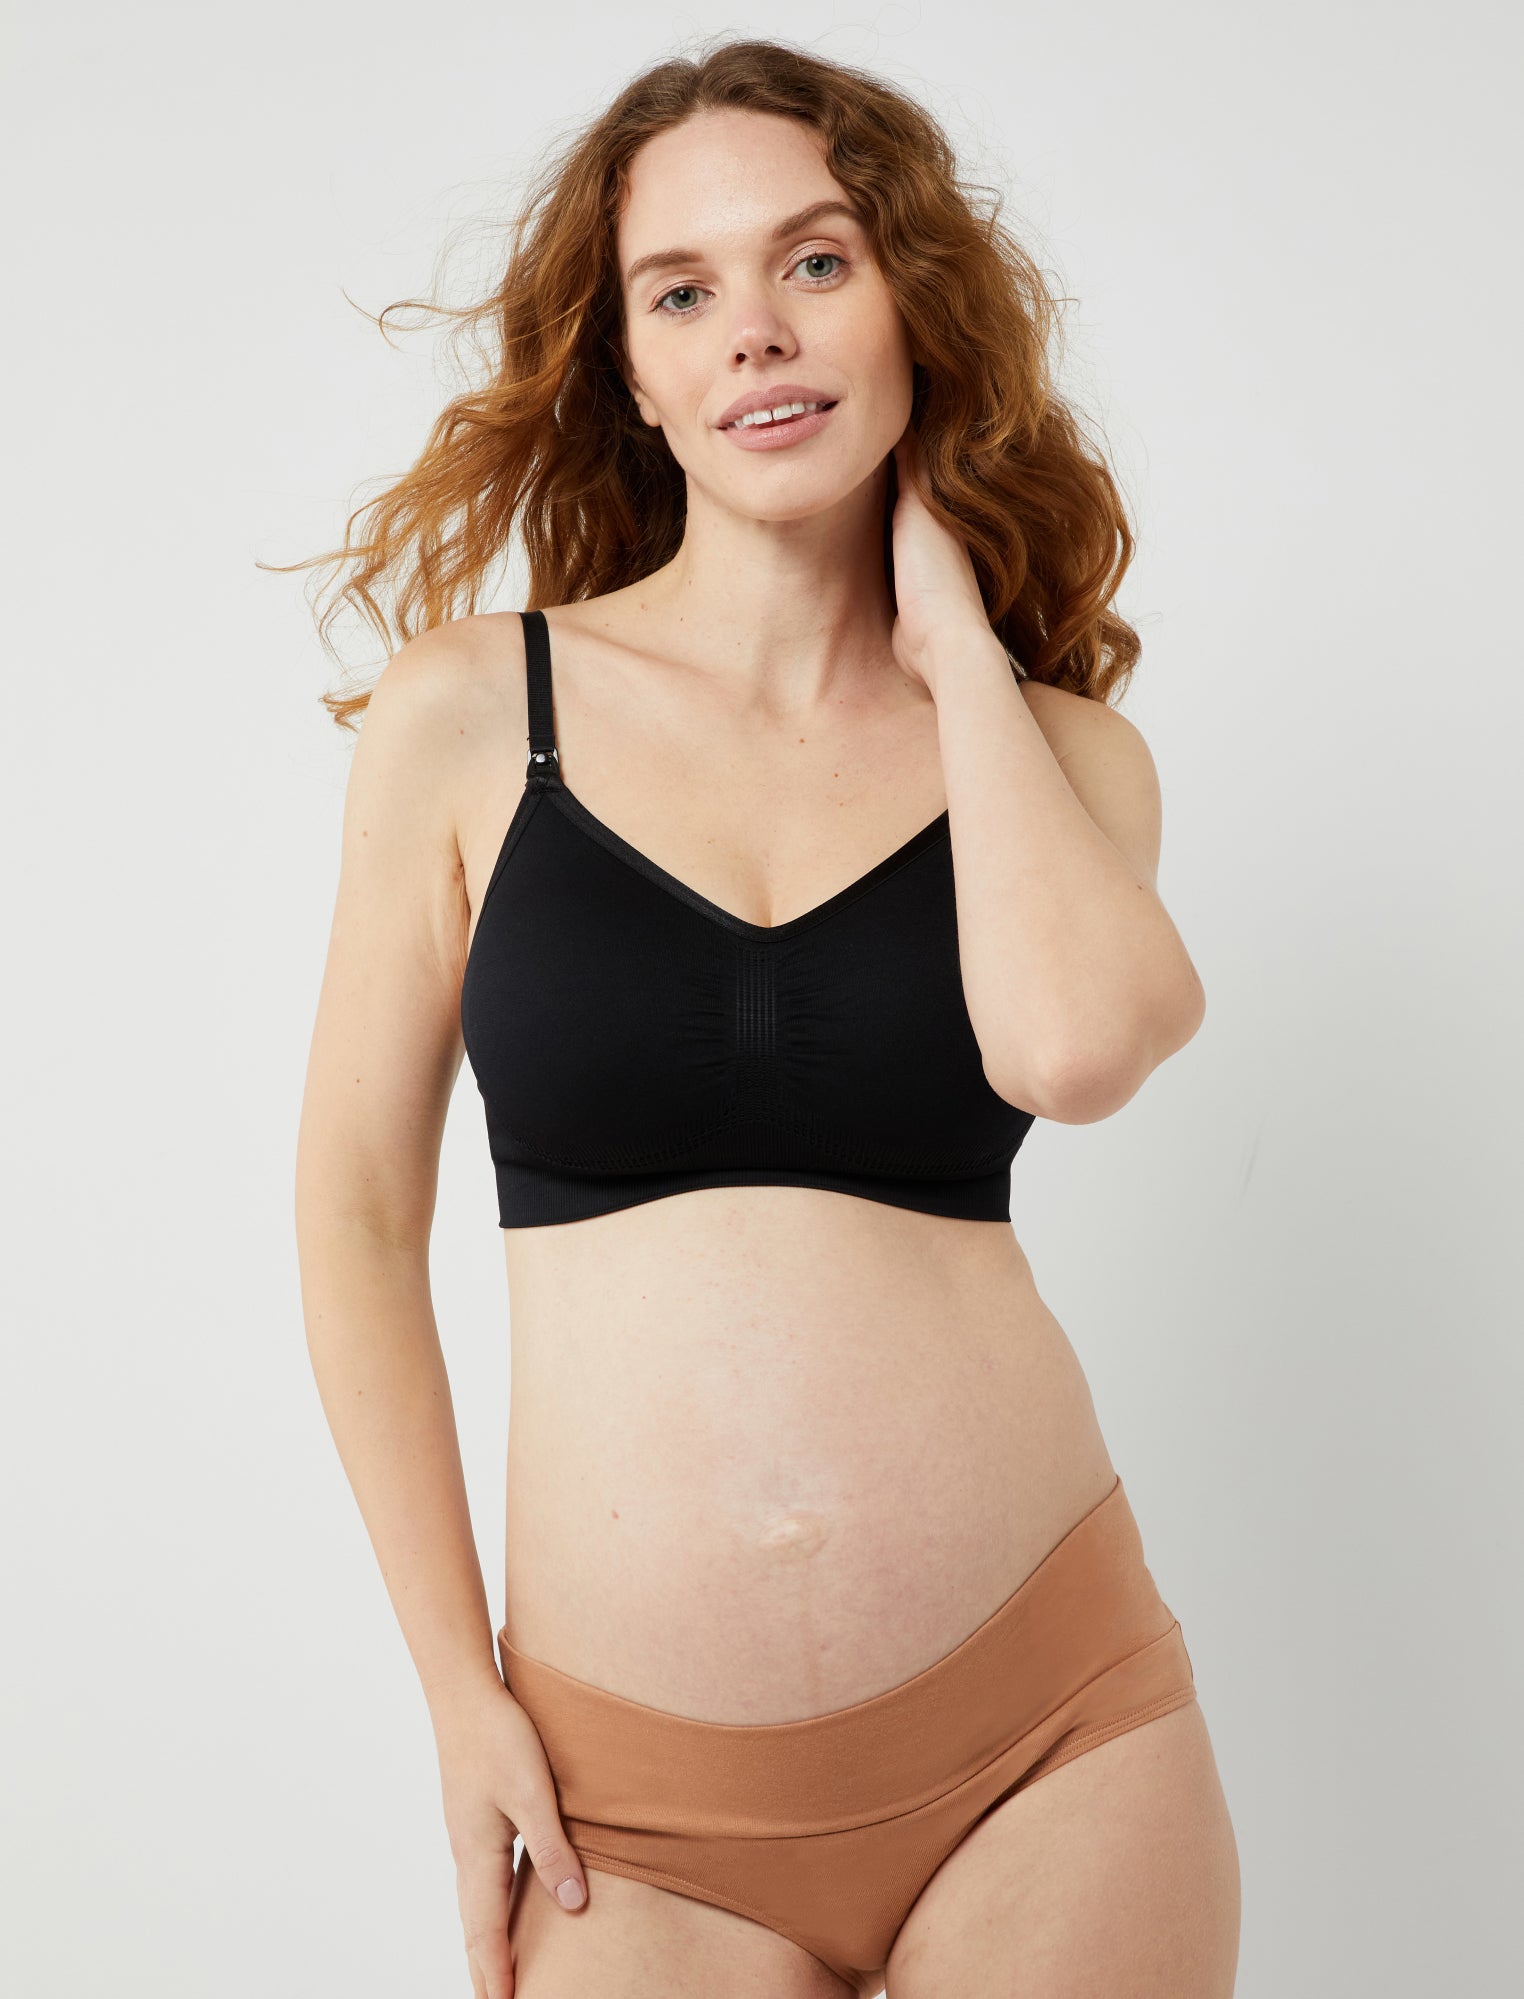 Lace Girl Short Maternity Panties - A Pea In the Pod